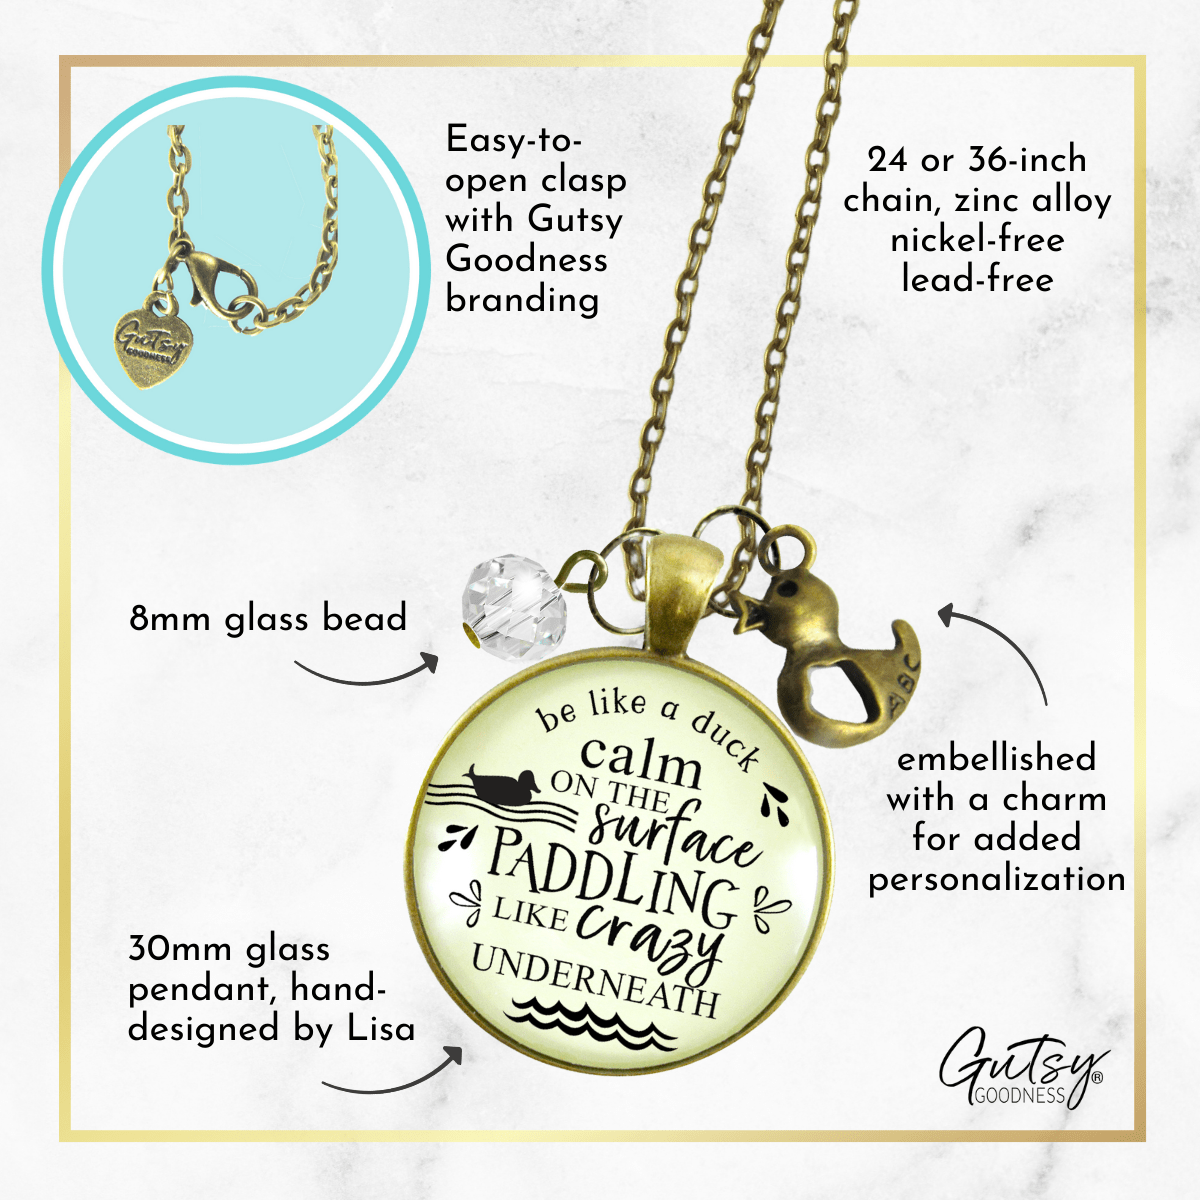 Gutsy Goodness Inspirational Necklace Be a Duck Calm Hustle Mantra Boss Jewelry Gift - Gutsy Goodness Handmade Jewelry;Inspirational Necklace Be A Duck Calm Hustle Mantra Boss Jewelry Gift - Gutsy Goodness Handmade Jewelry Gifts